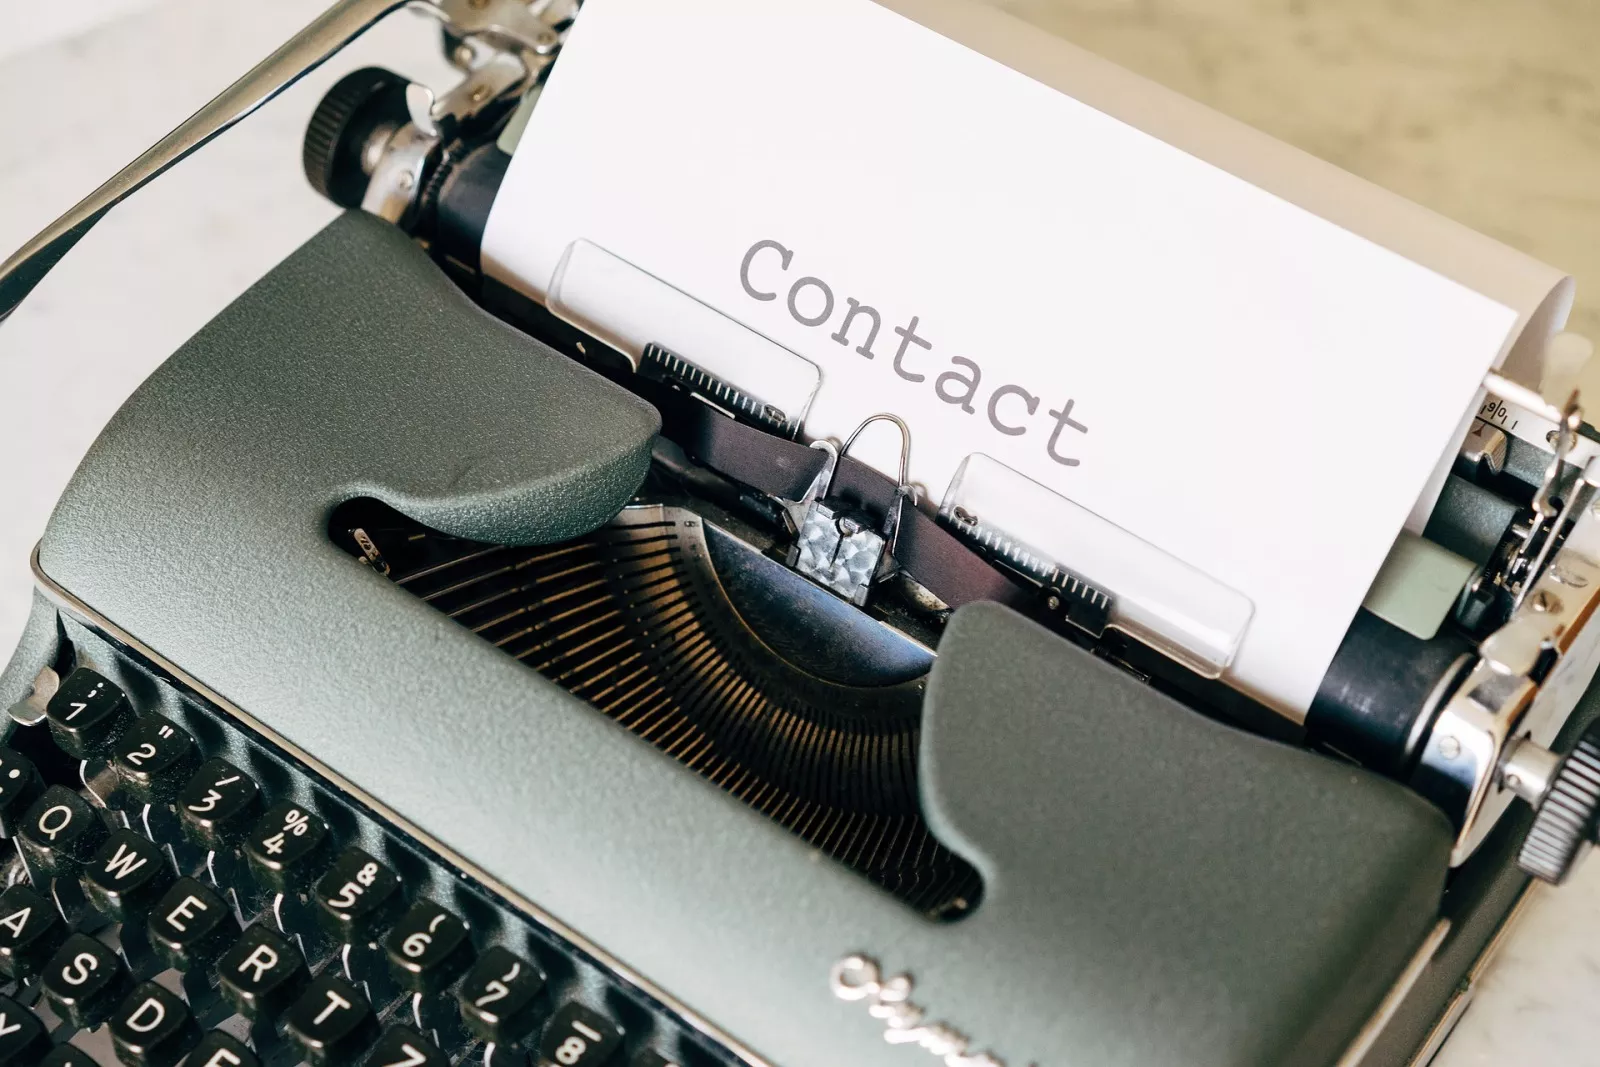 Contact page - typewriter with a paper that contains the word contact